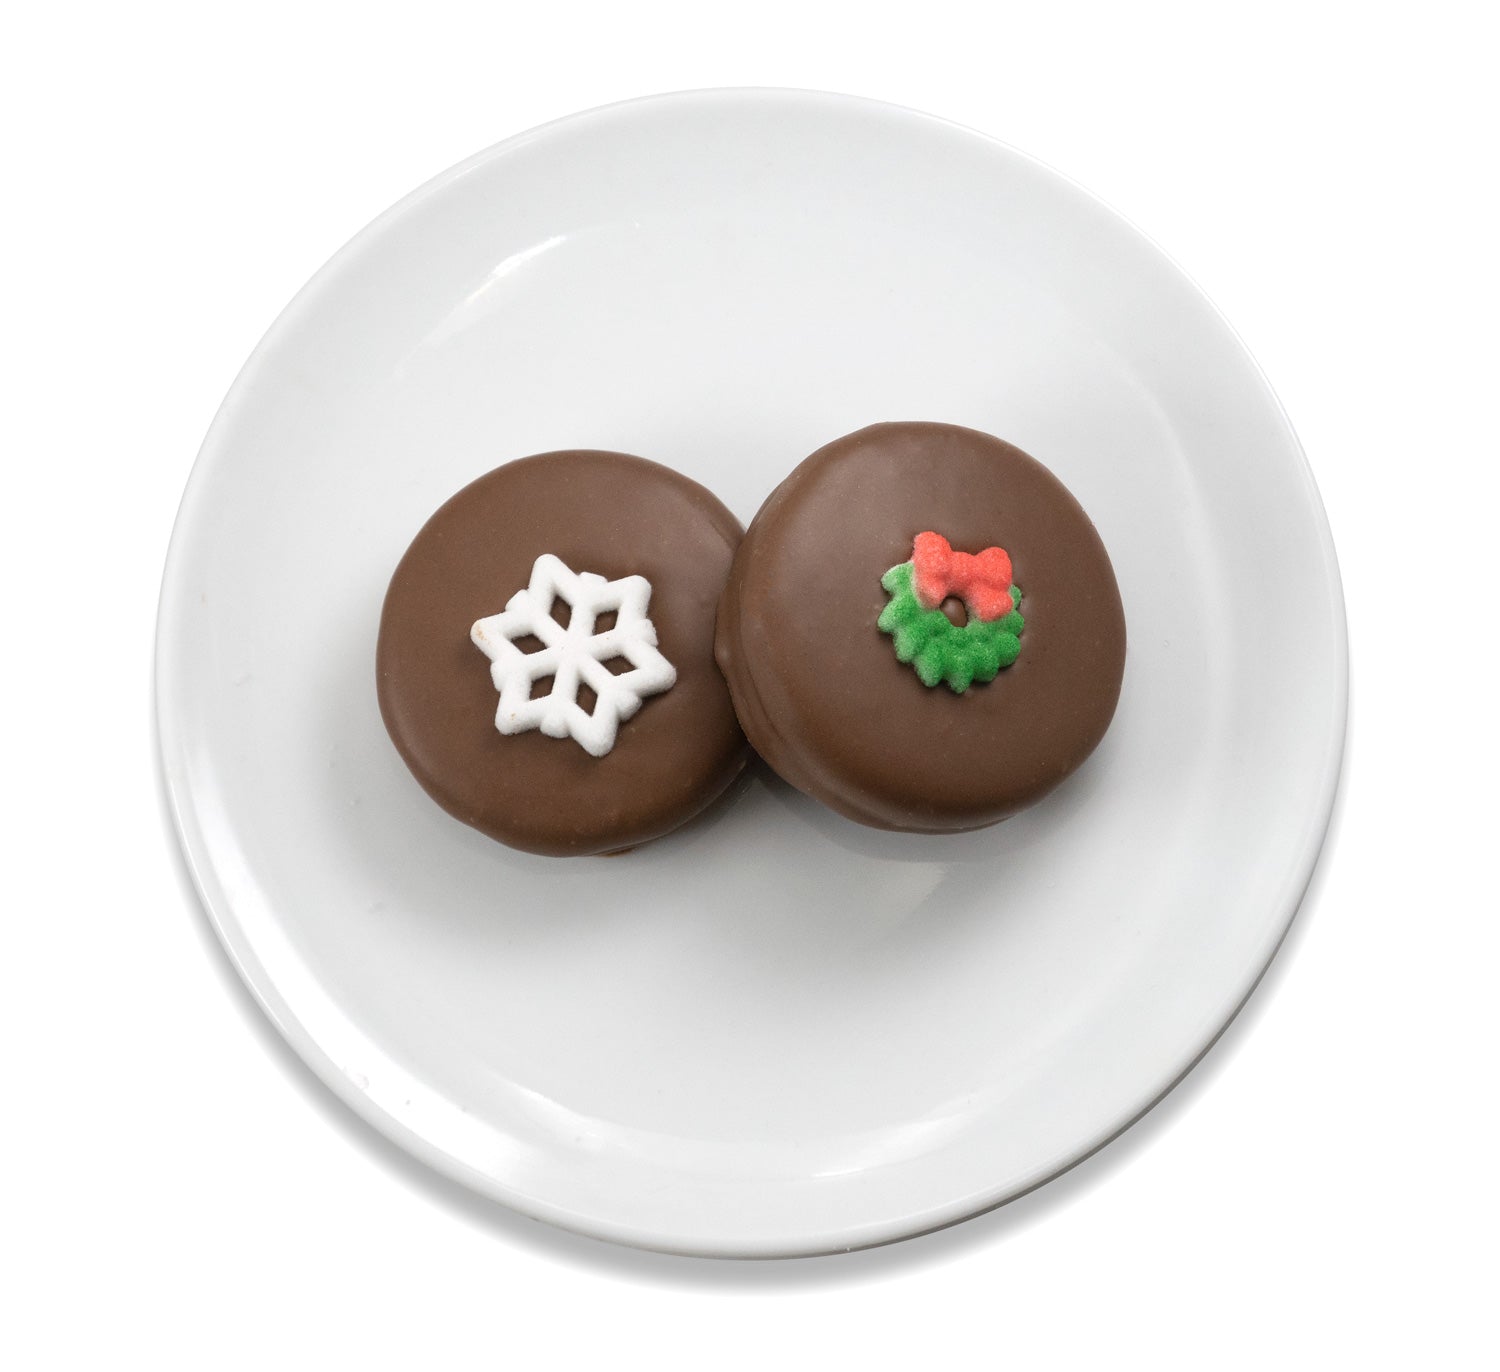 Chocolate-covered Oreos with Christmas decorations